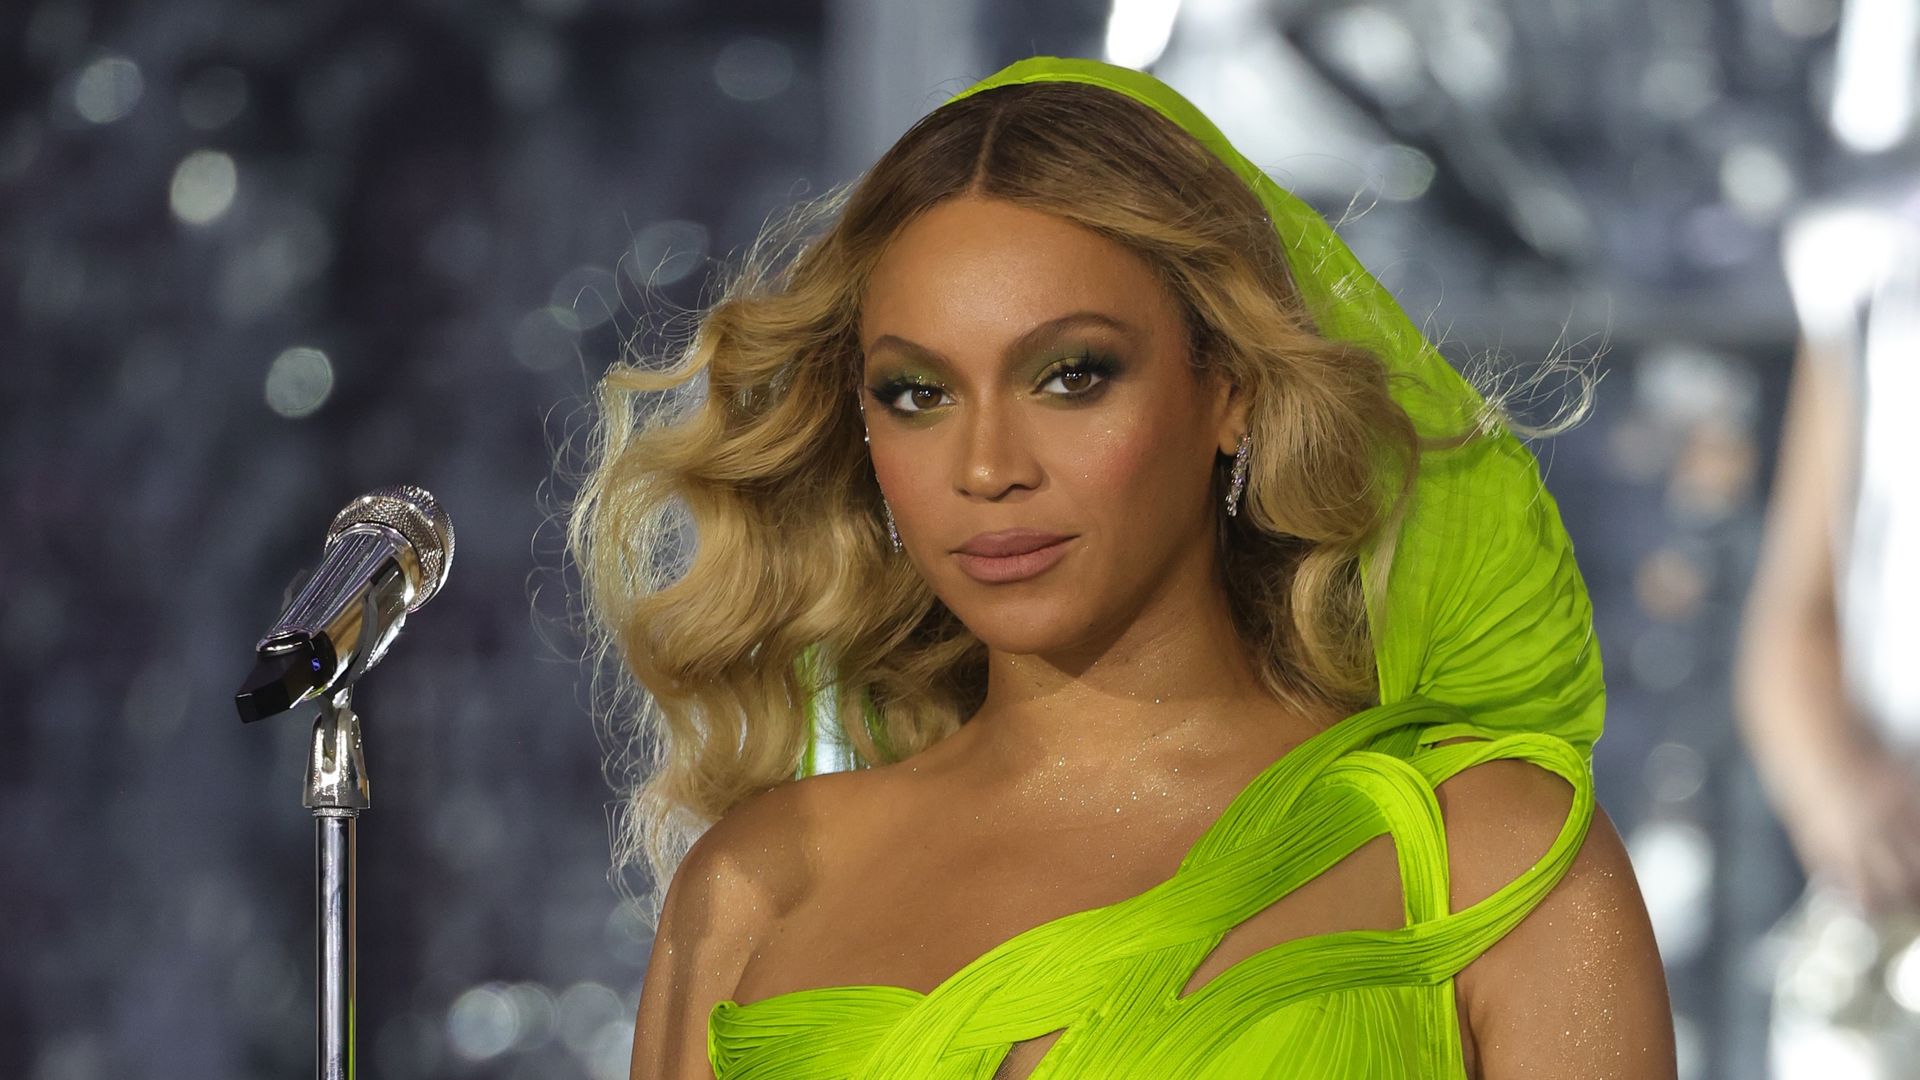 Why Beyonce Asked Fans to Wear Silver and Chrome to Her Birthday Shows